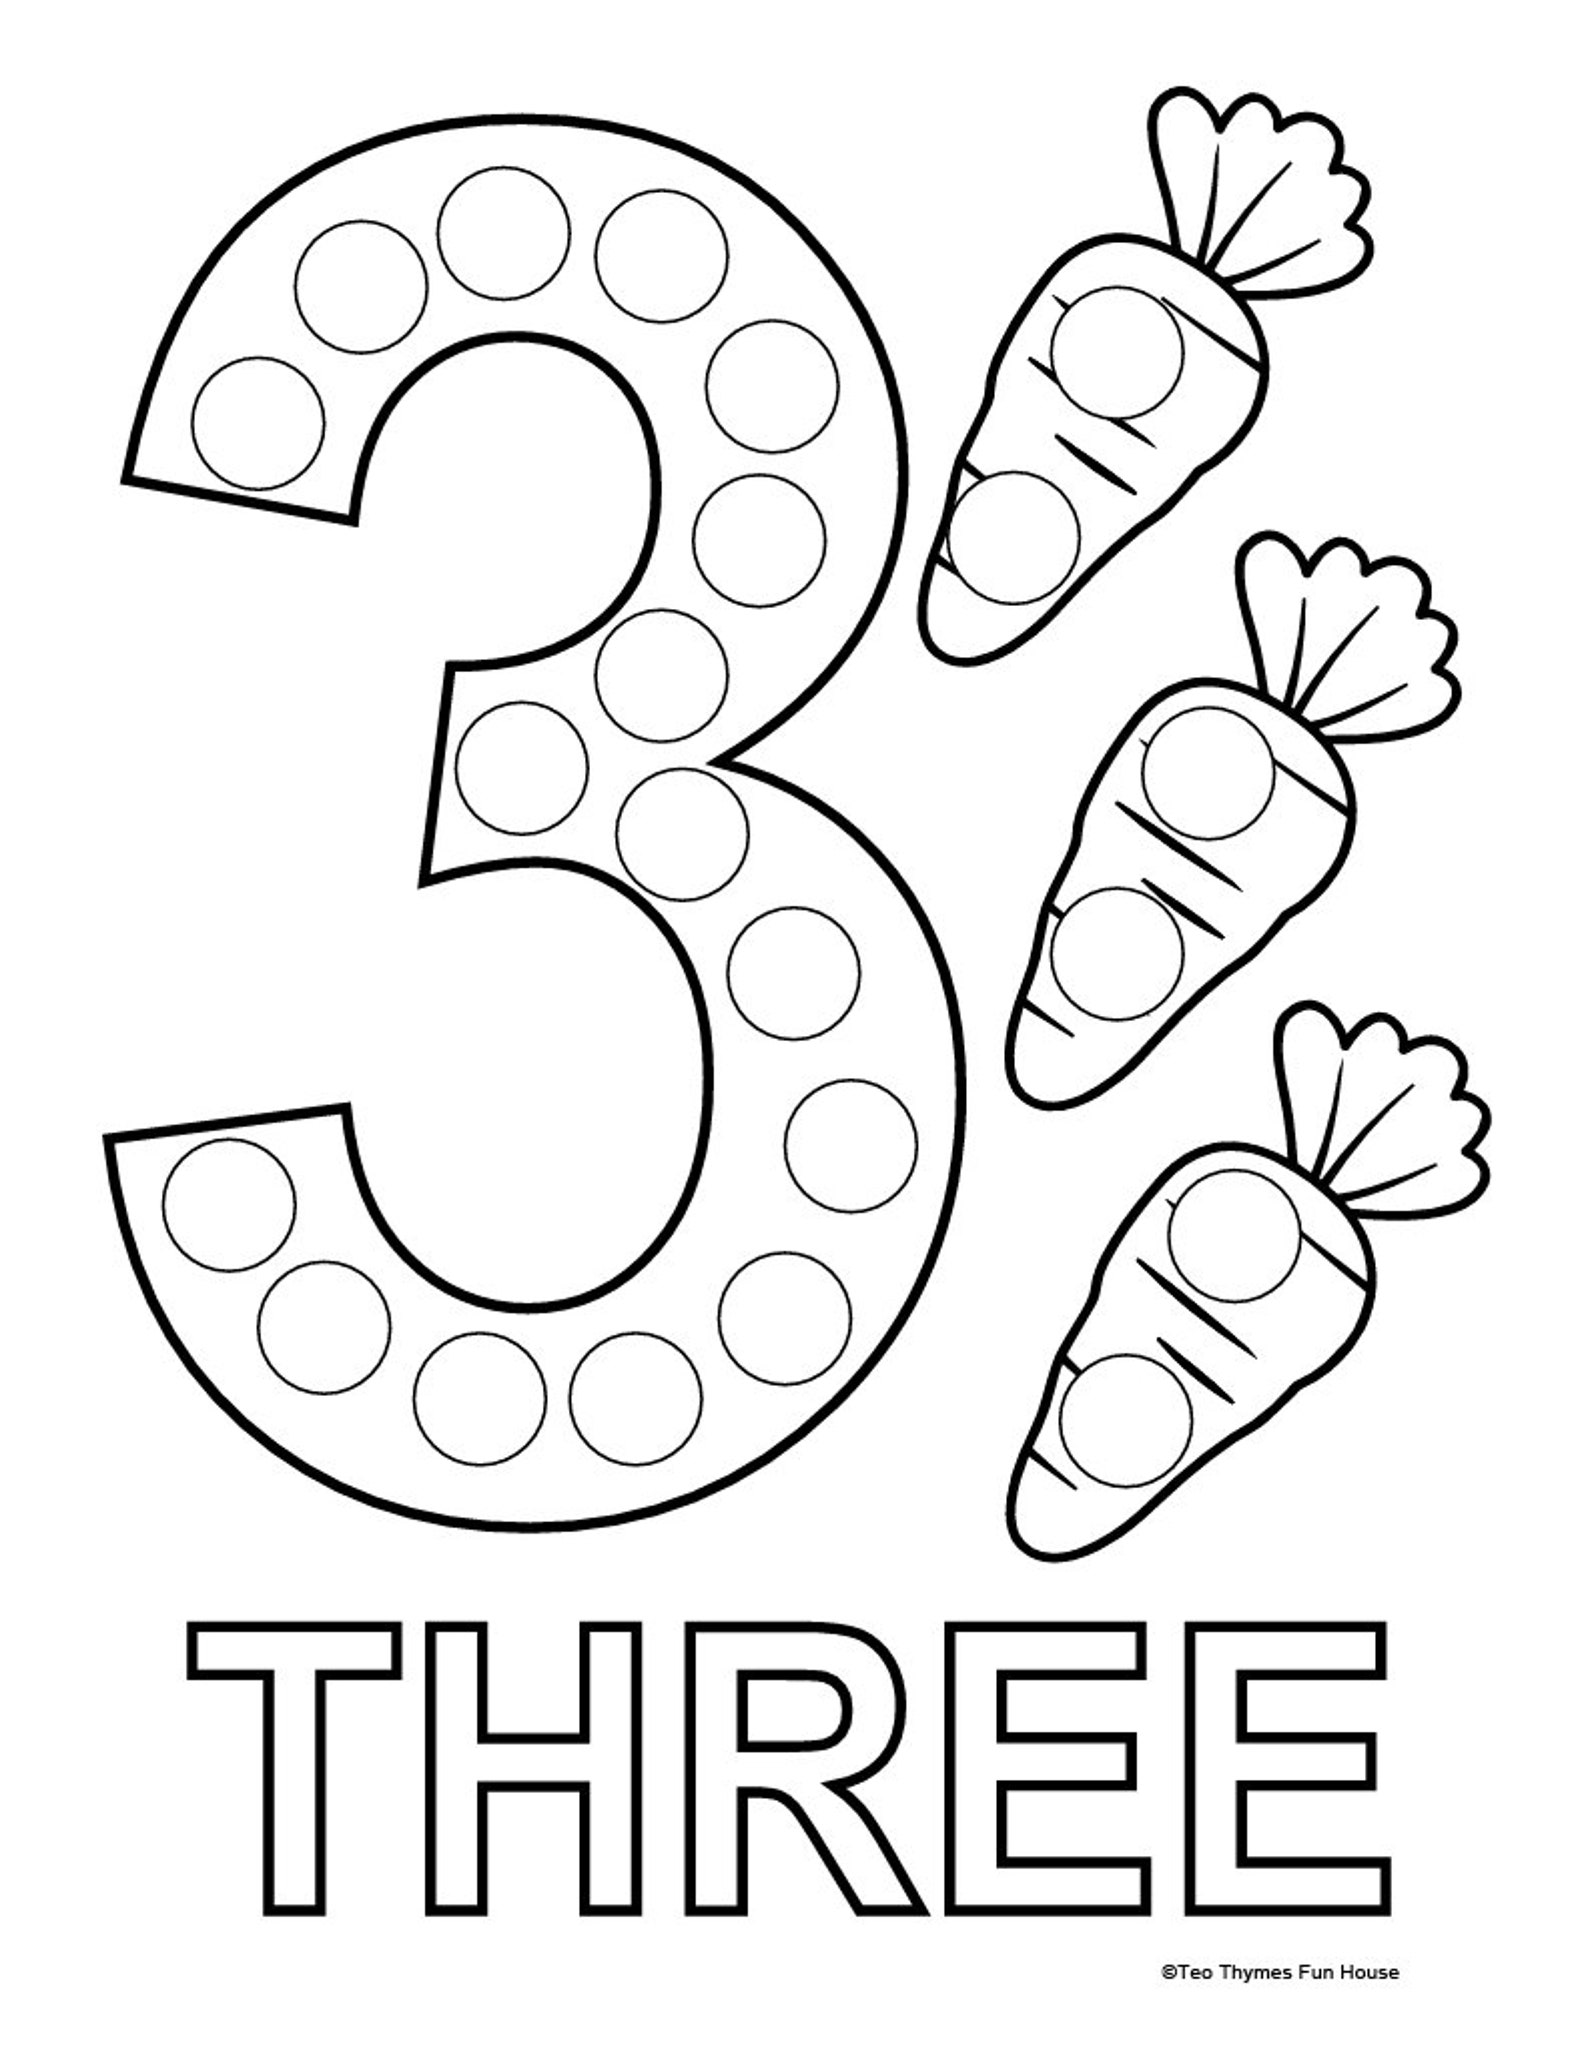 set-of-123-numbers-count-apples-dot-marker-activity-coloring-pages